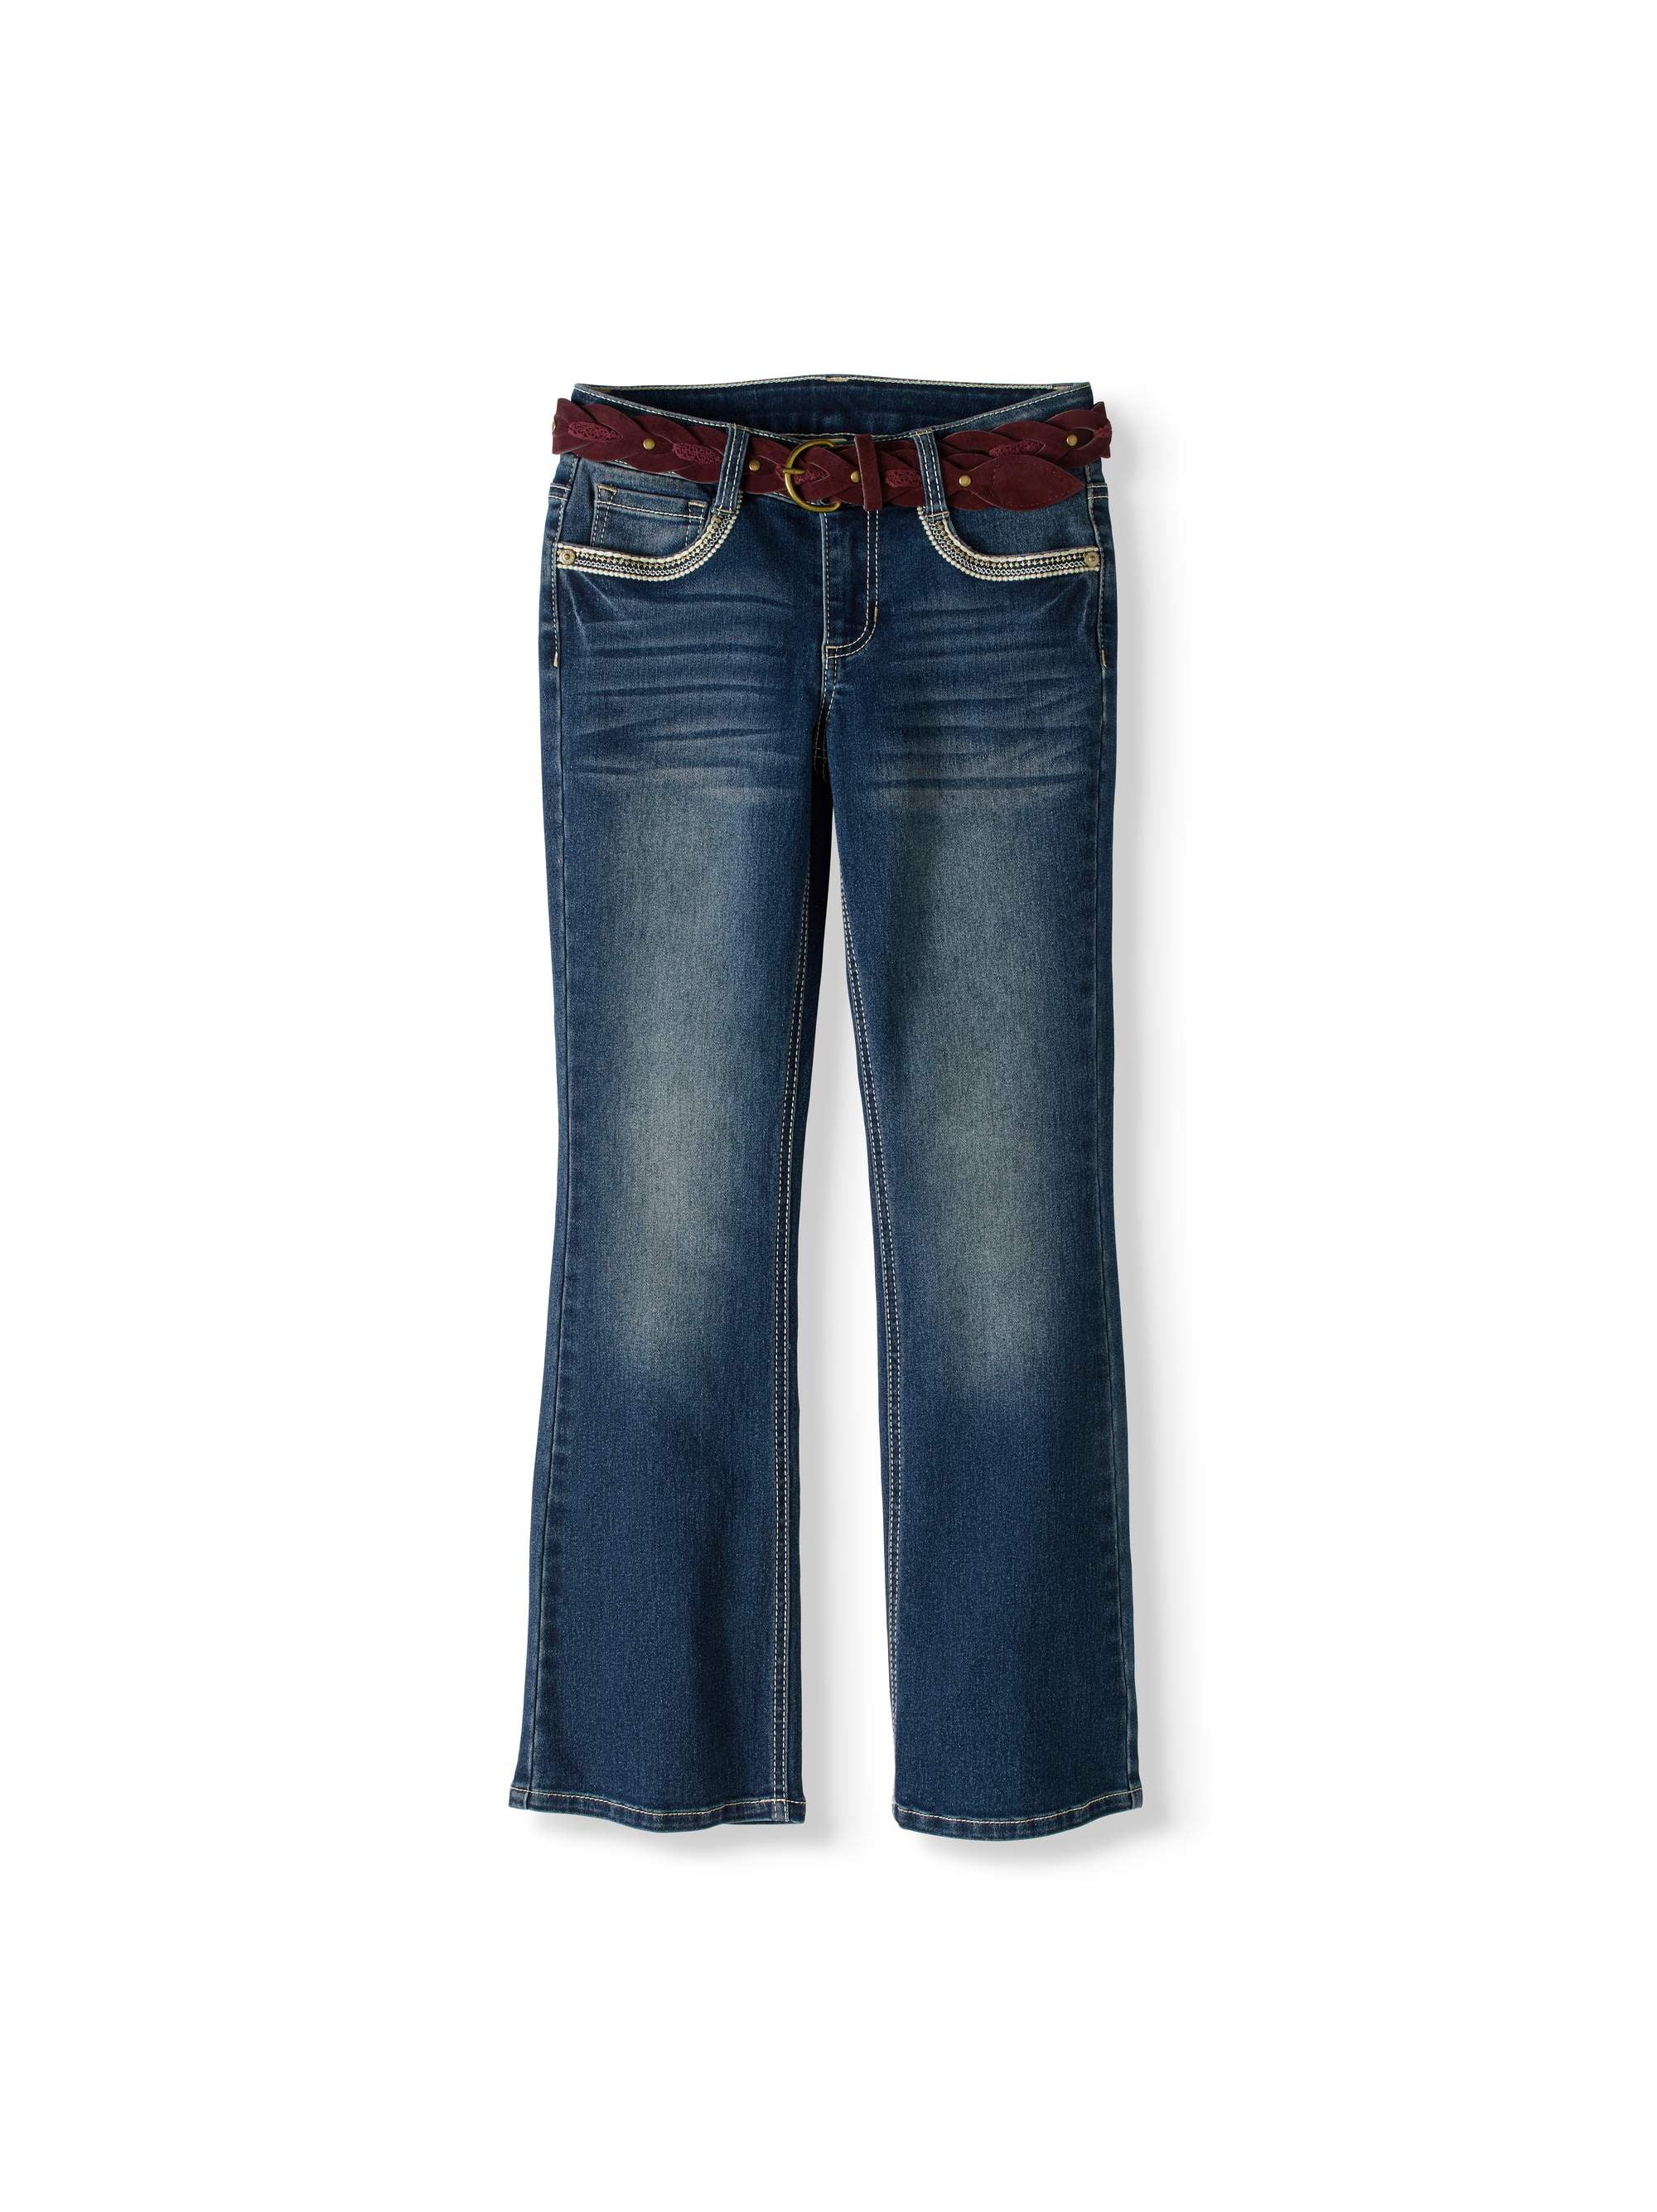 faded glory jeans bootcut